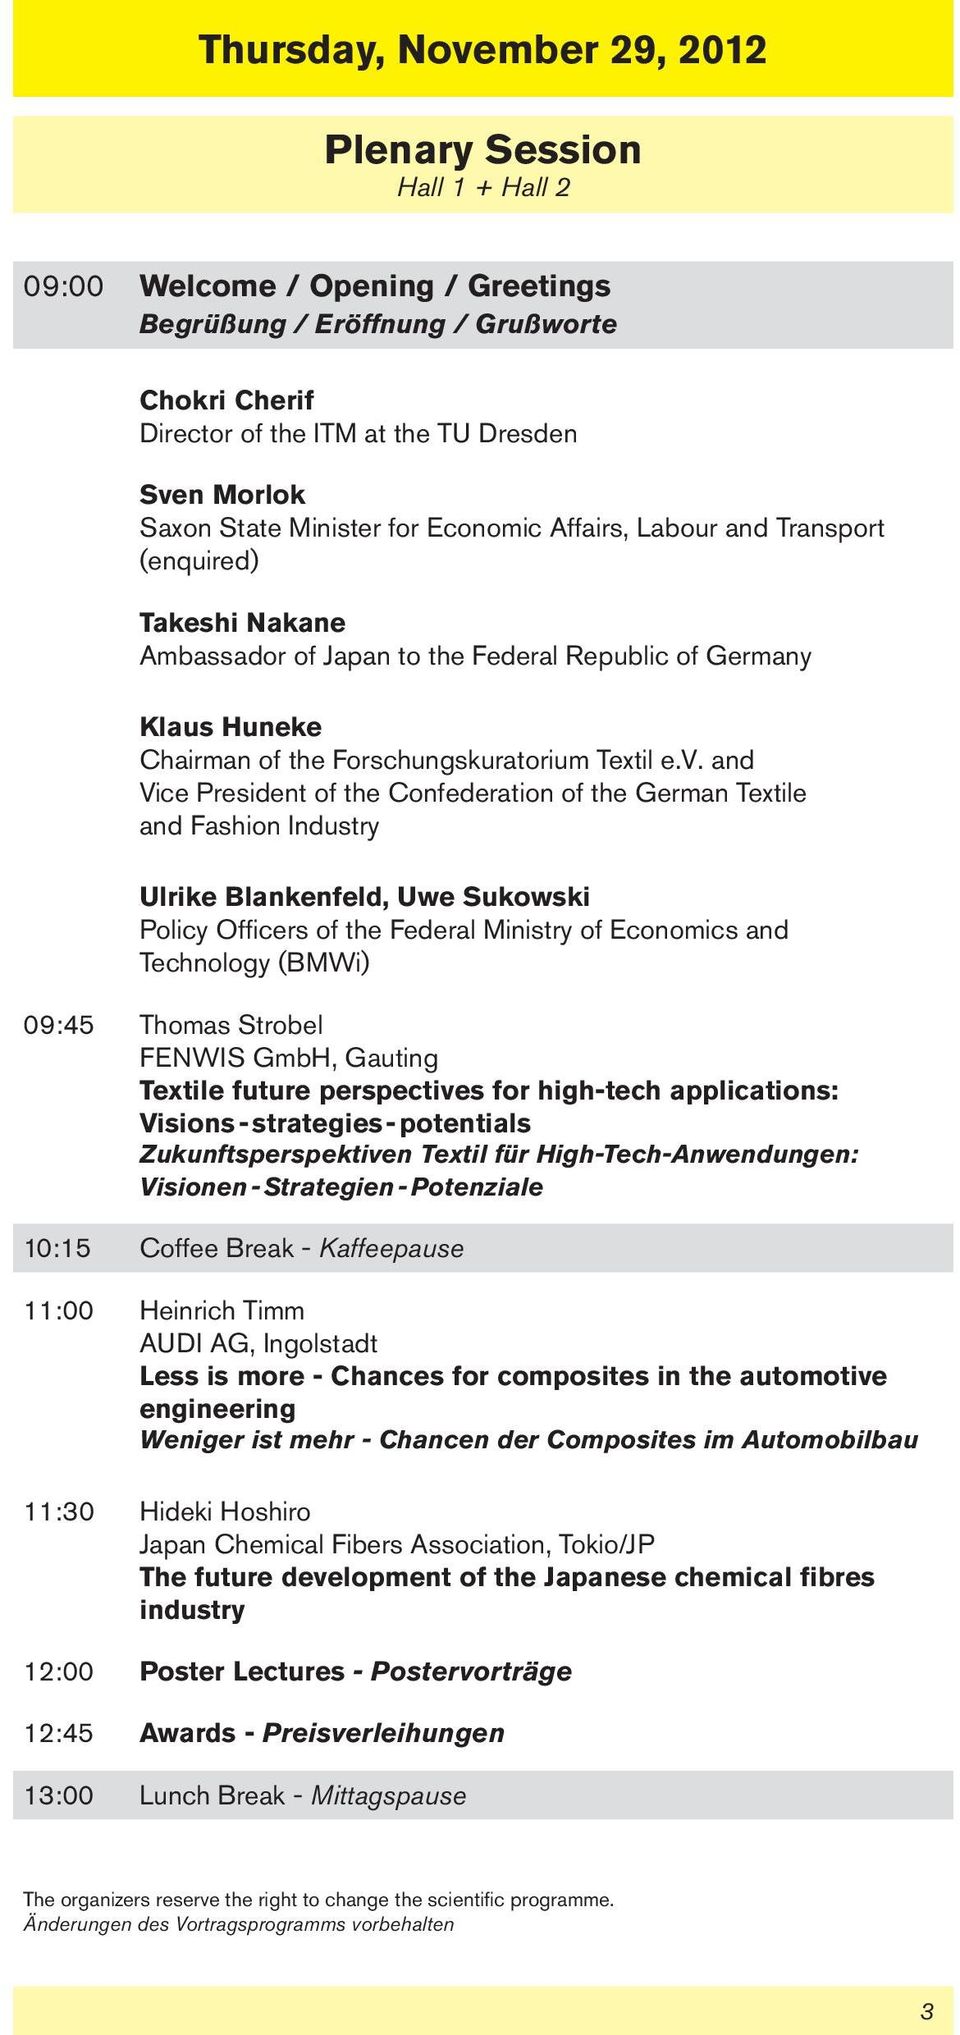 and Vice President of the Confederation of the German Textile and Fashion Industry Ulrike Blankenfeld, Uwe Sukowski Policy Officers of the Federal Ministry of Economics and Technology (BMWi) 09:45